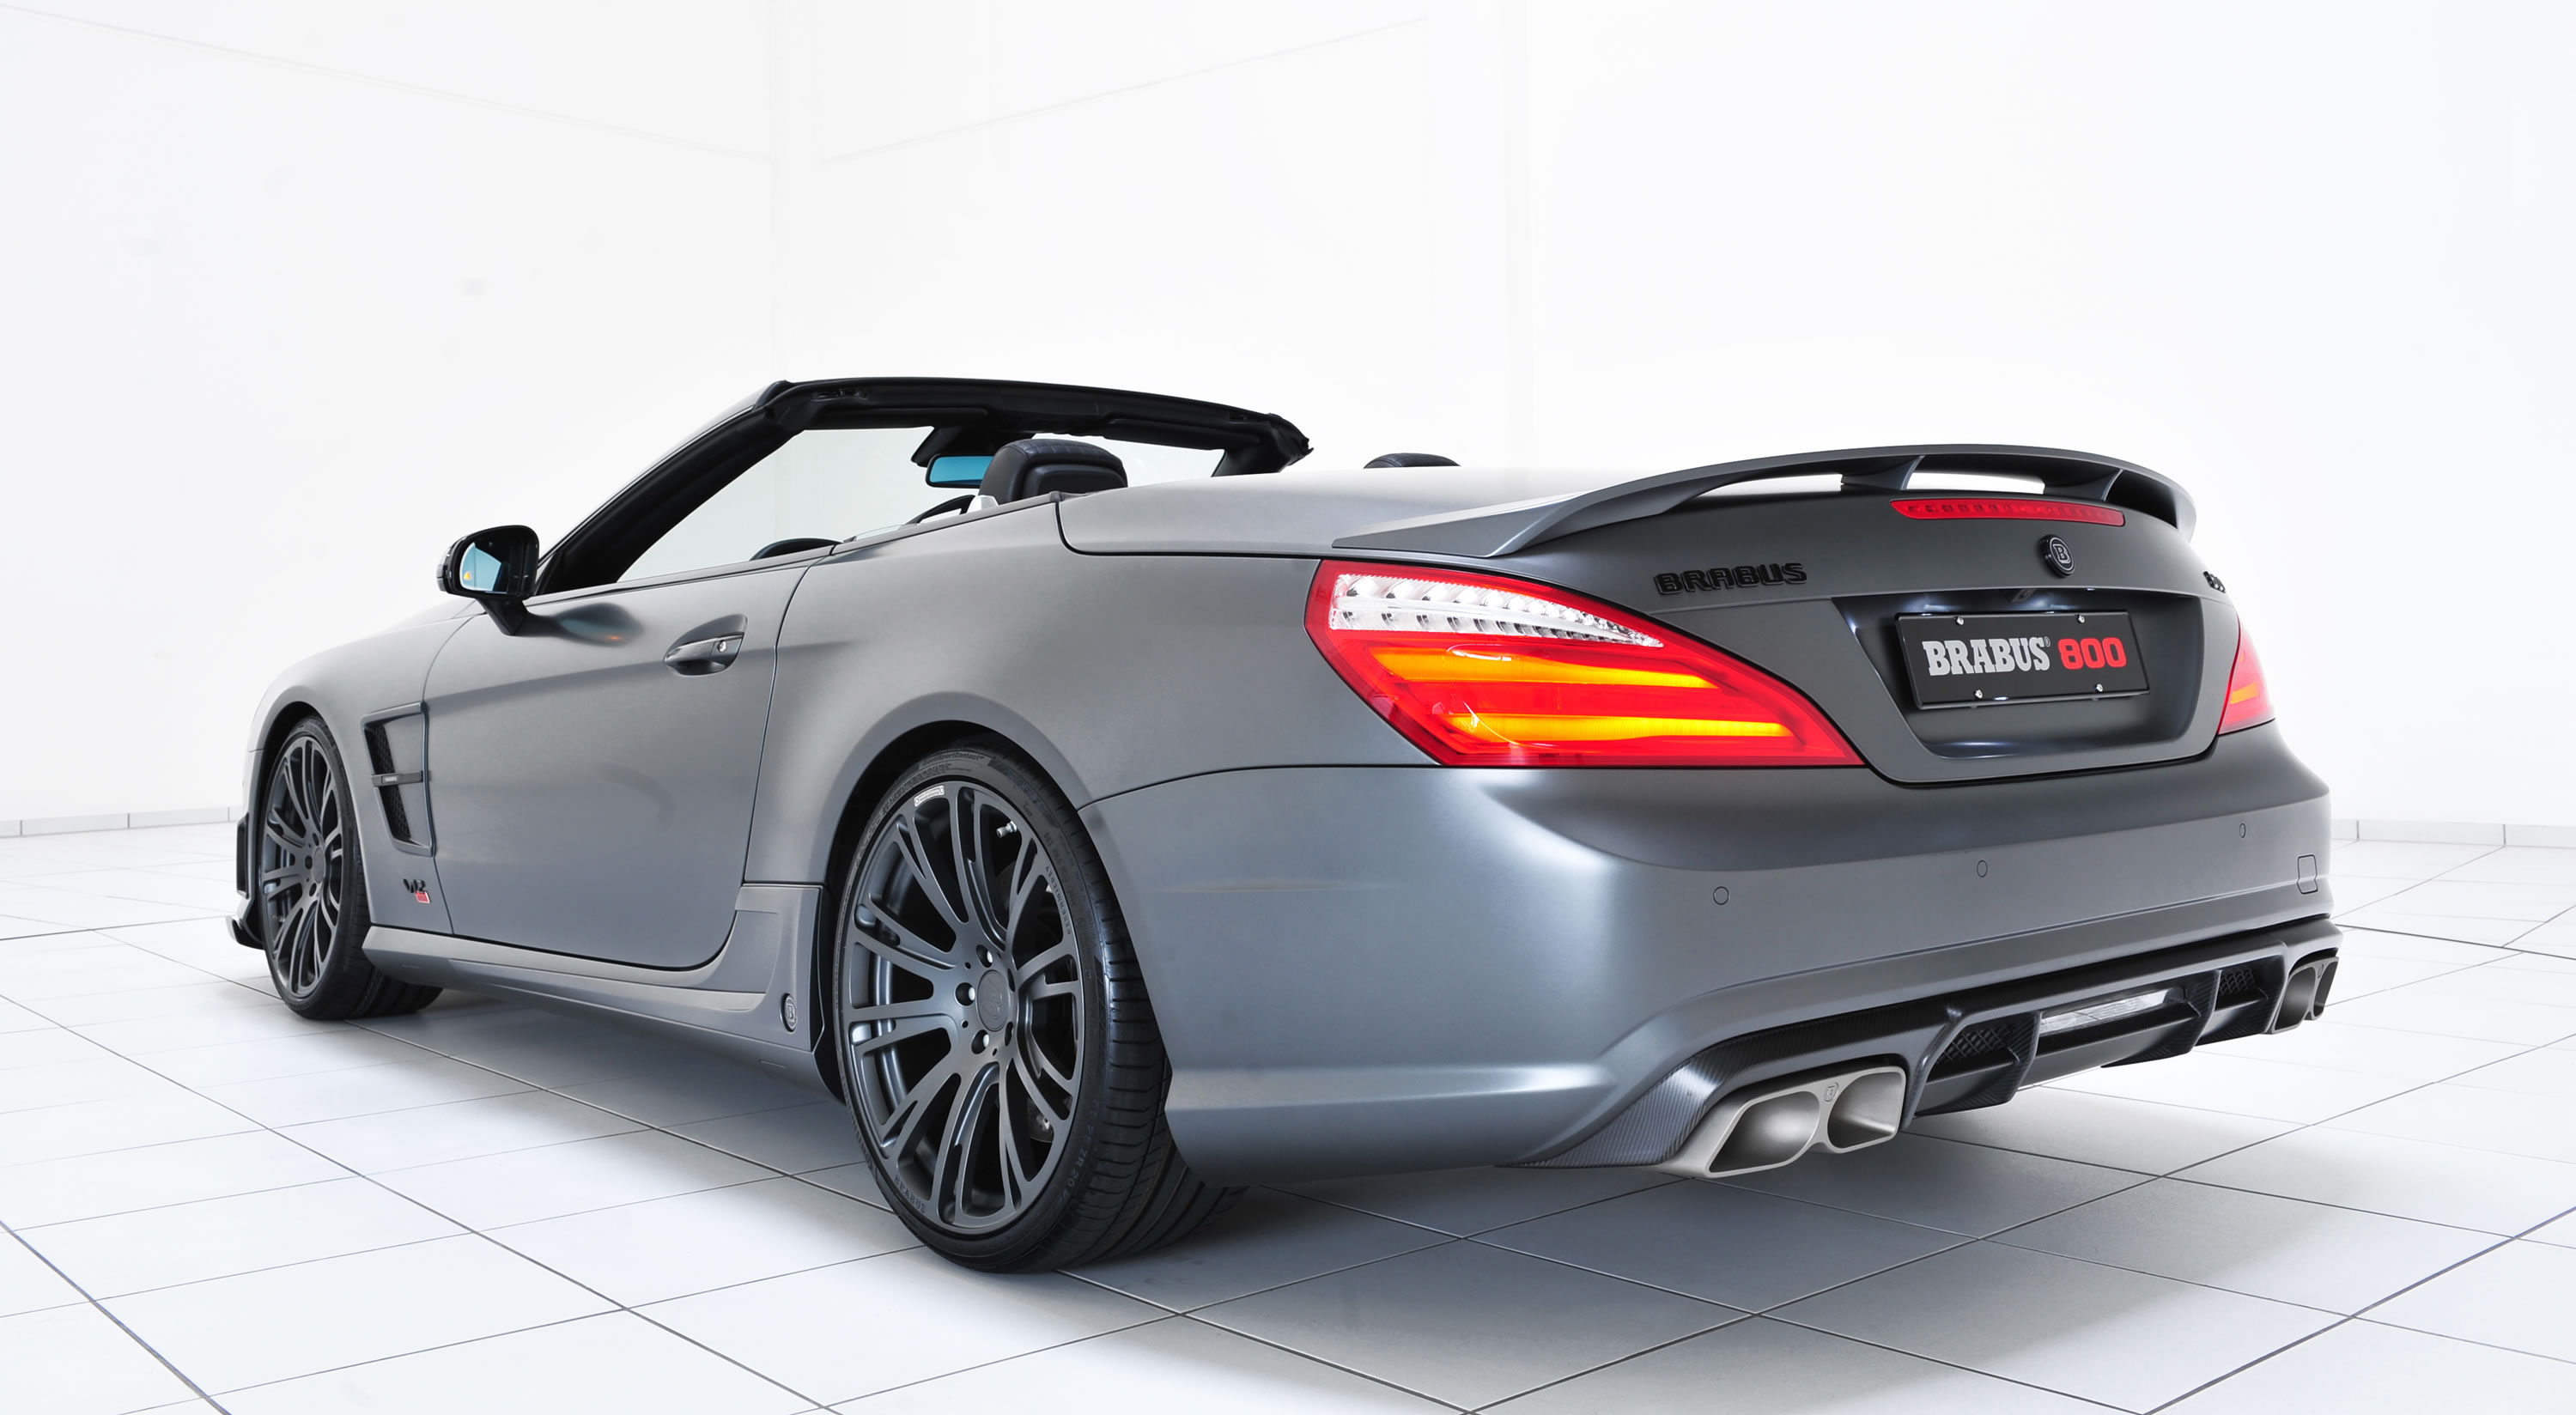 Brabus 800 Roadster Backgrounds on Wallpapers Vista